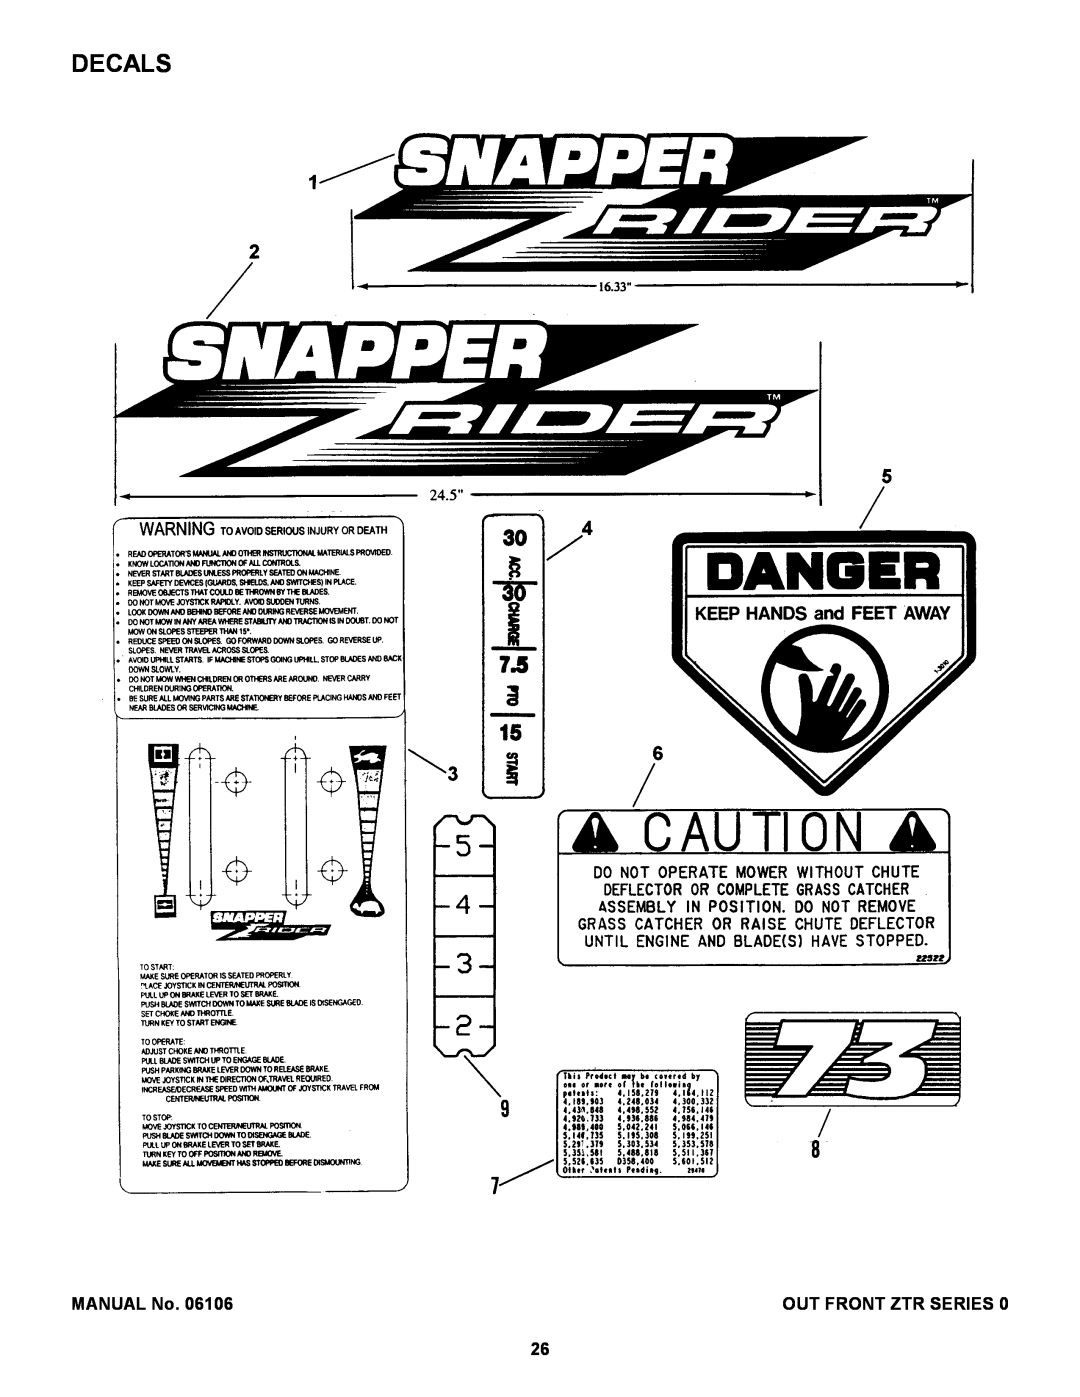 Snapper ZF2200K, ZF2500KH manual Decals, MANUAL No, Out Front Ztr Series 